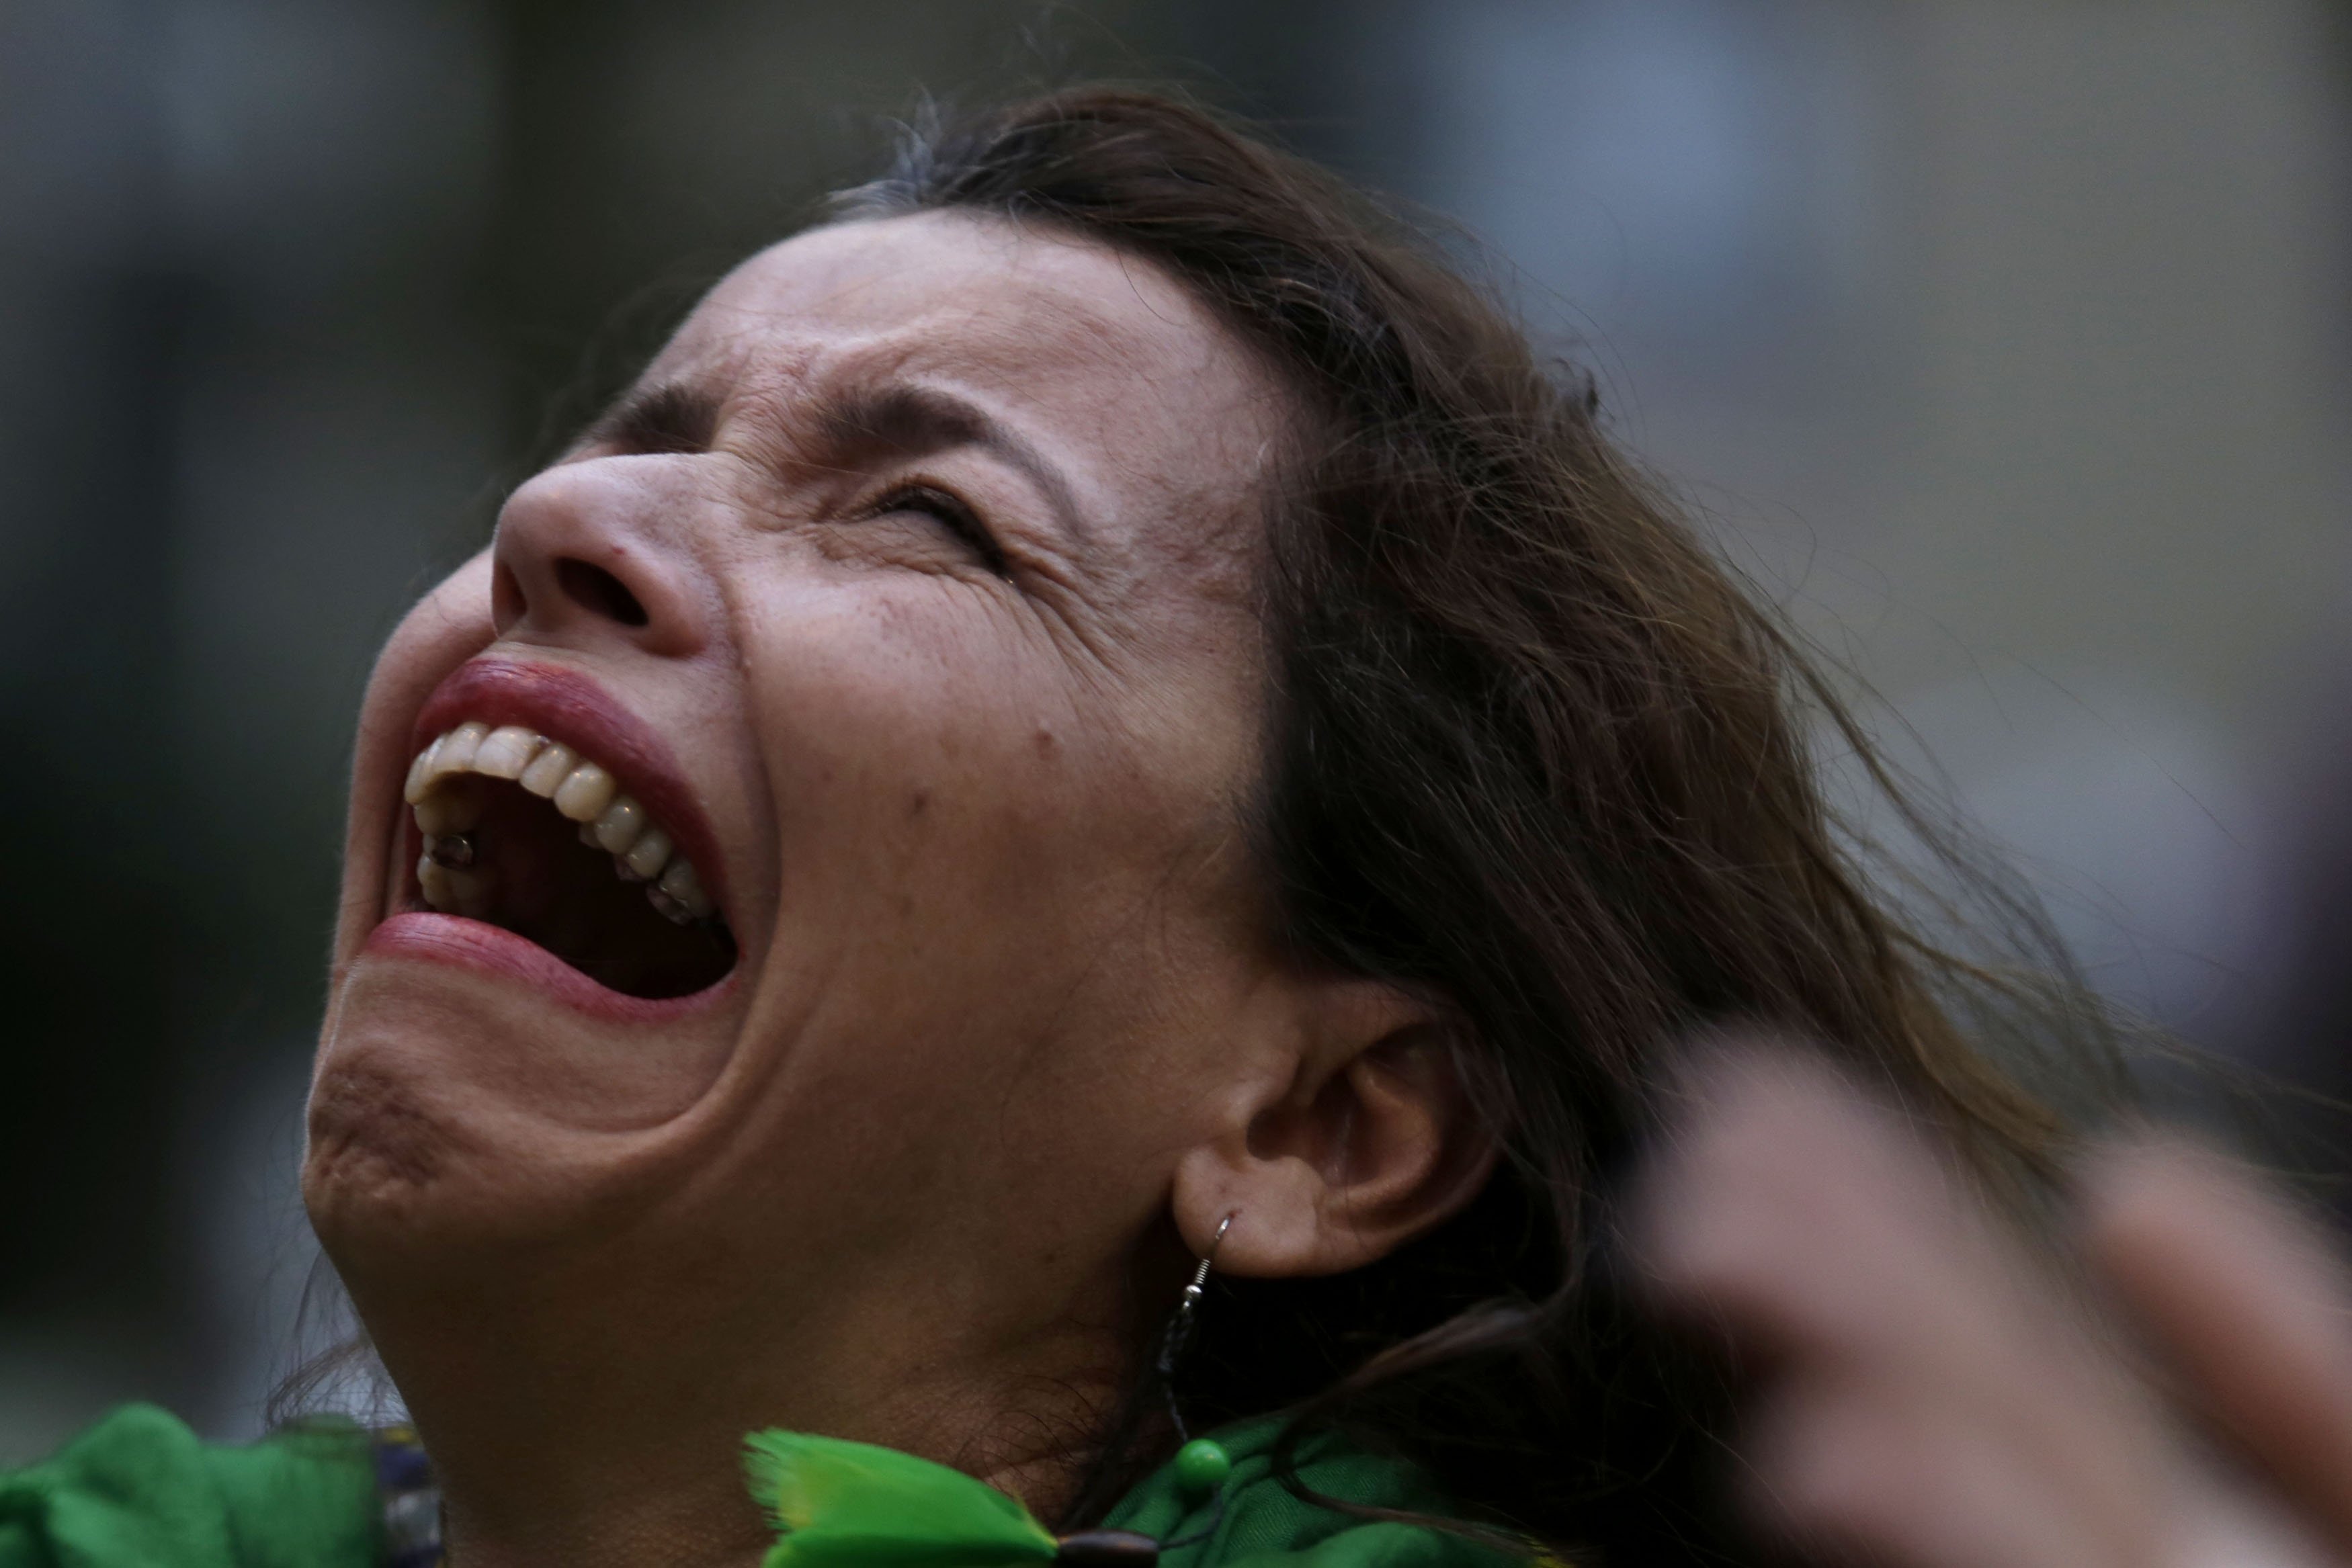 A Brazilian soccer fan cries as she watches a live telecast of the match between Brazil and Germany in Belo Horizonte, Brazil on July 08, 2014.